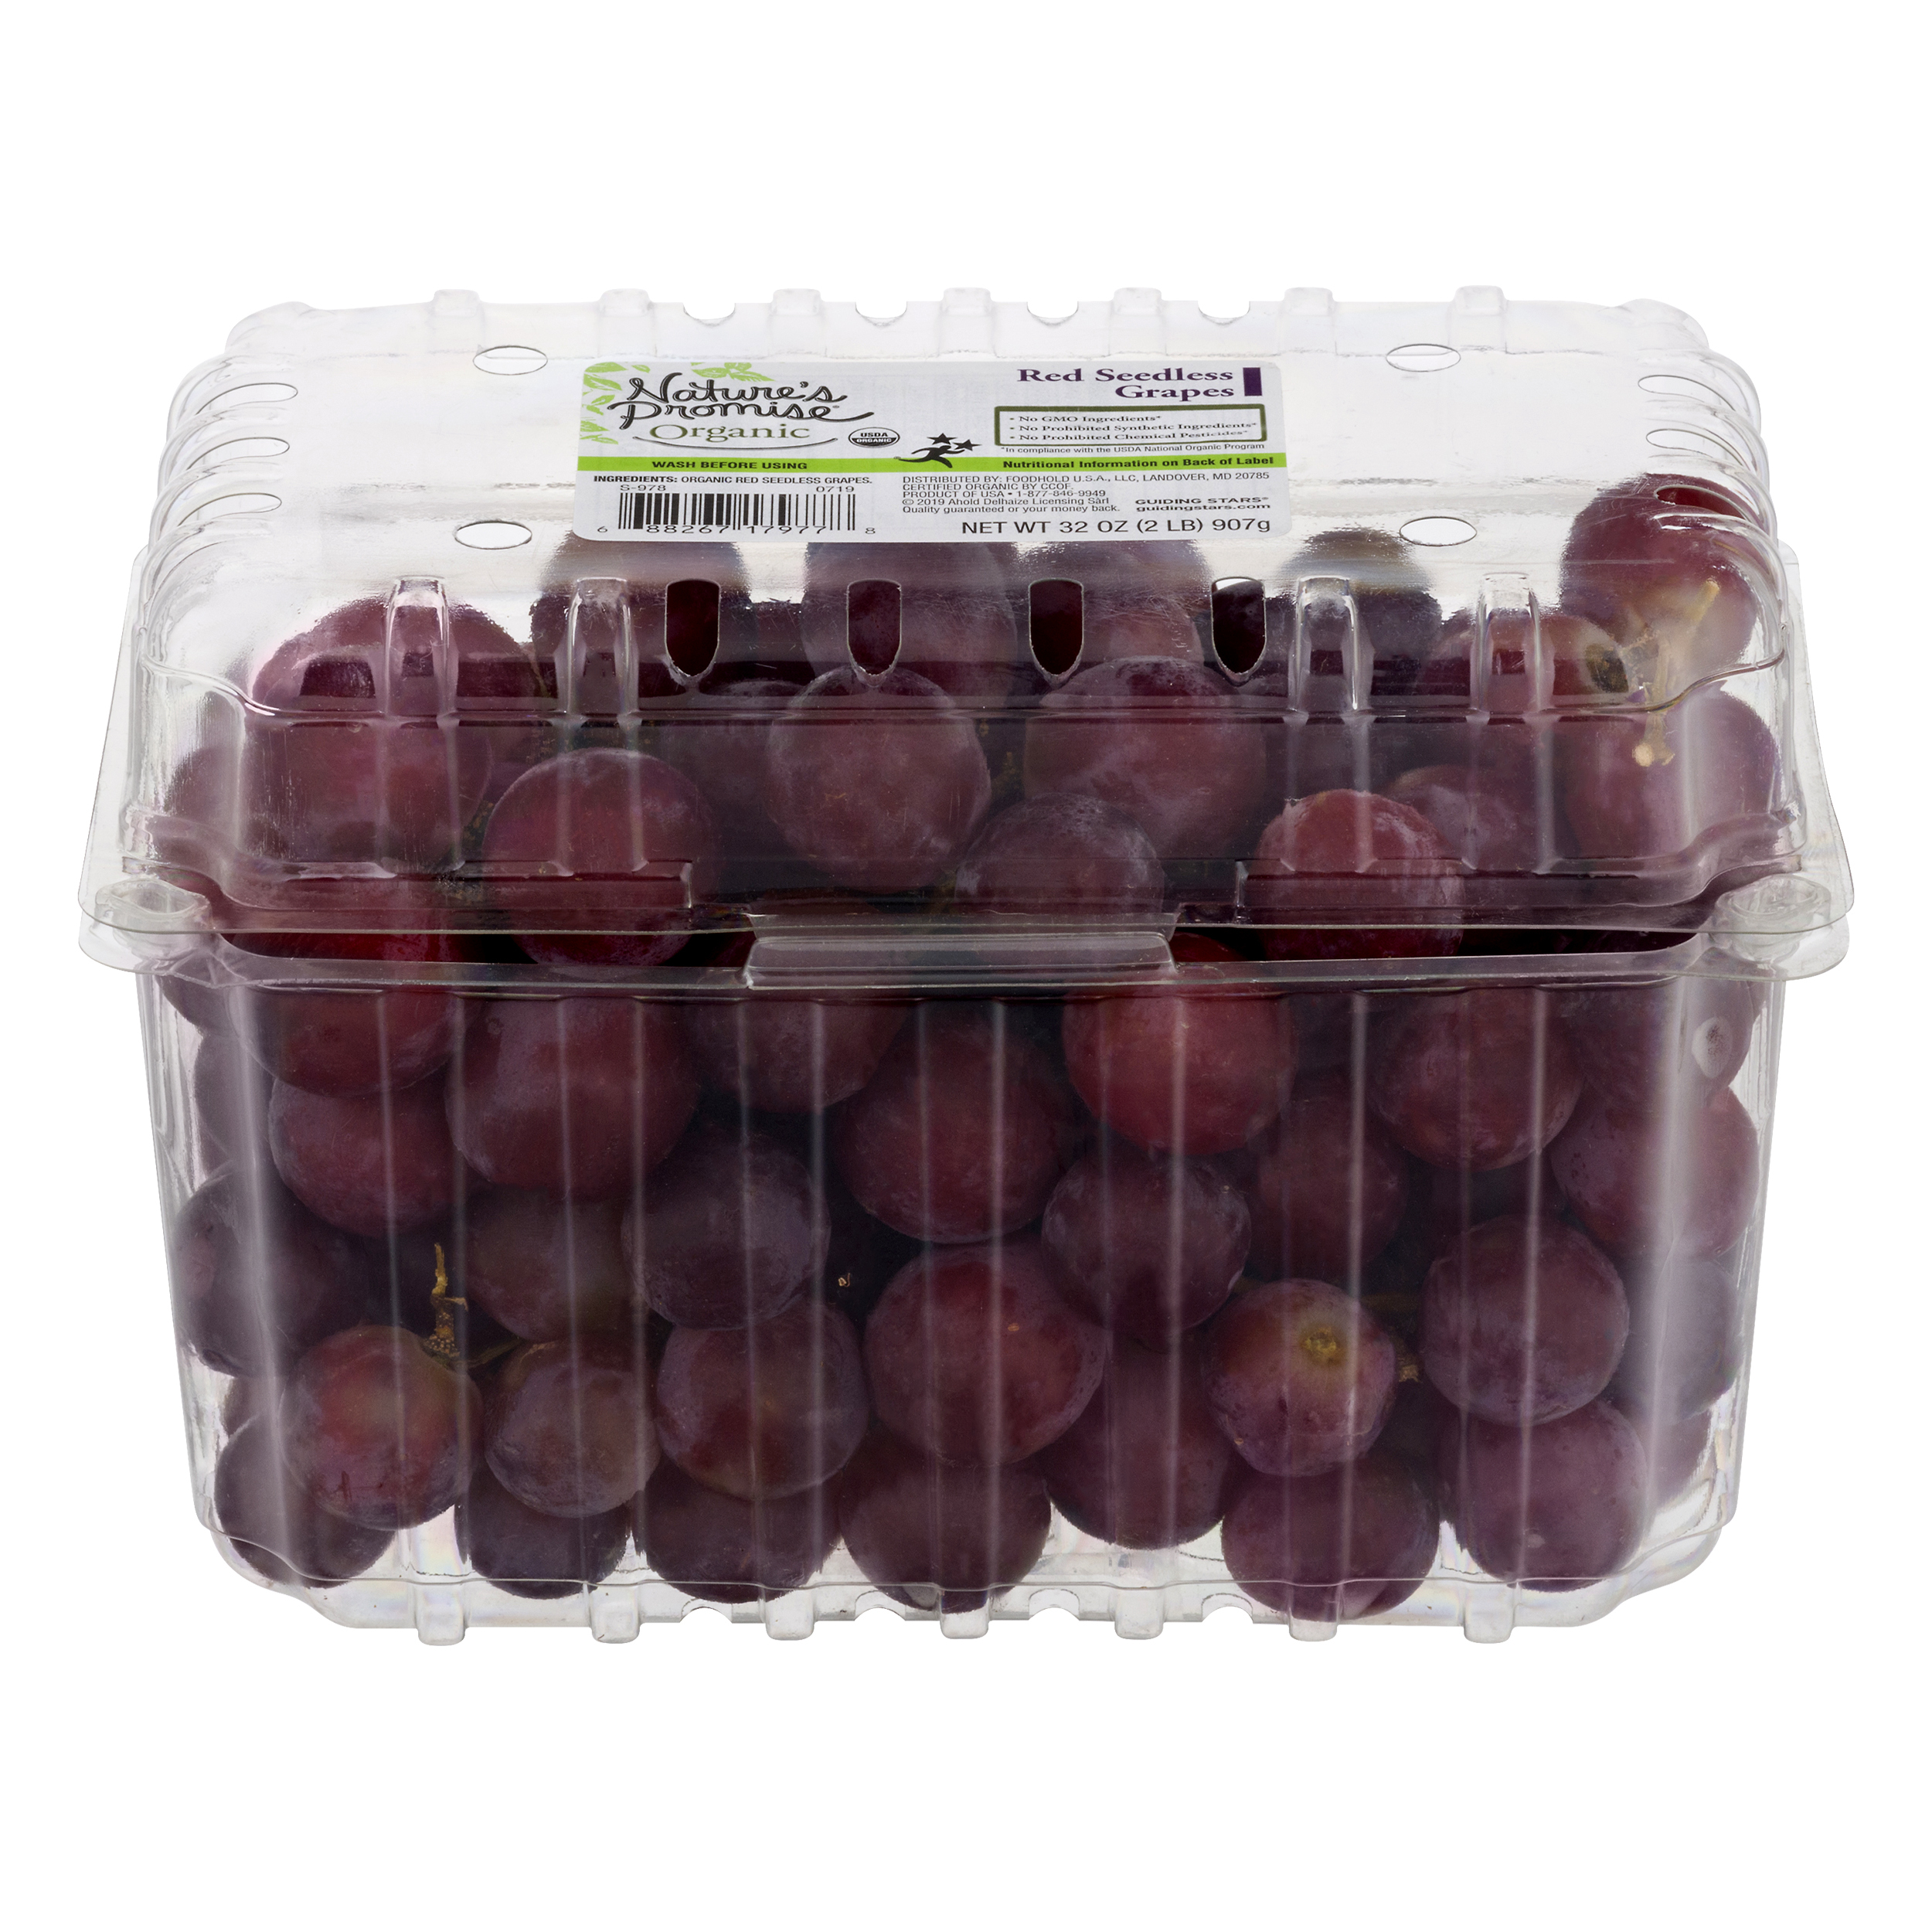 Save on Nature's Promise Organic Green Grapes Seedless Order